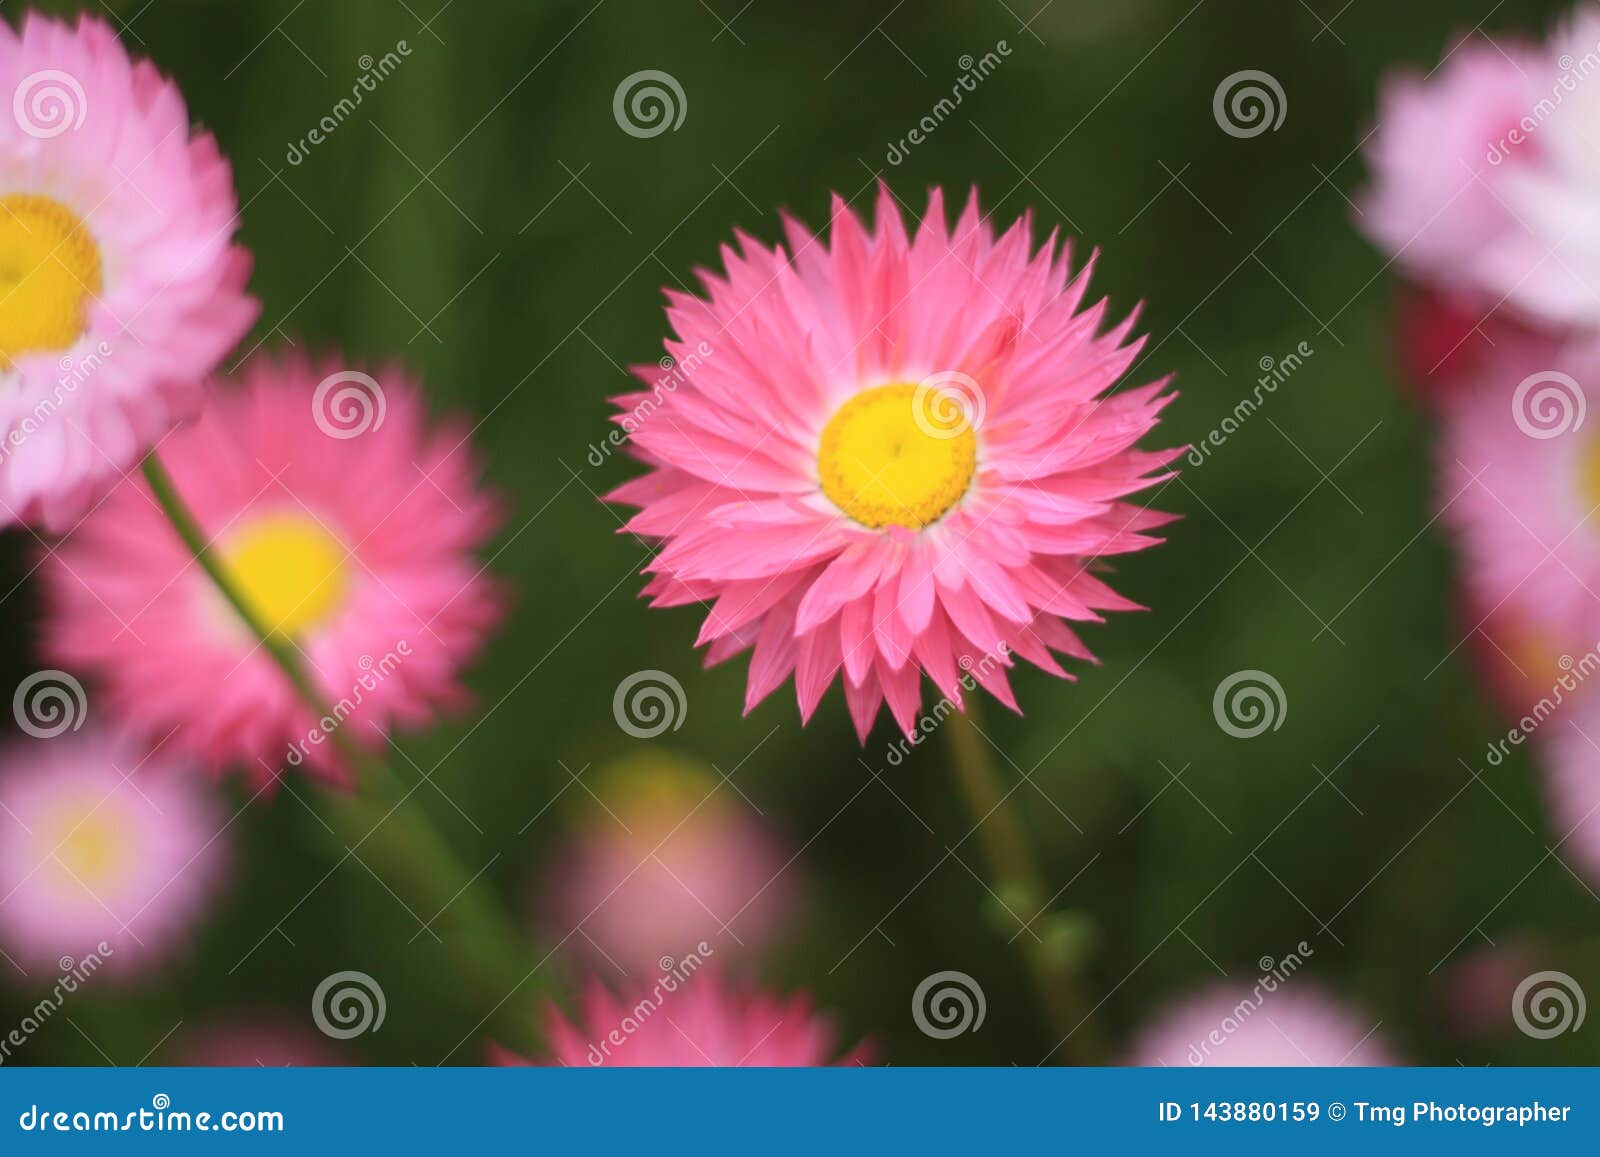 a pink everlasting flower in focus